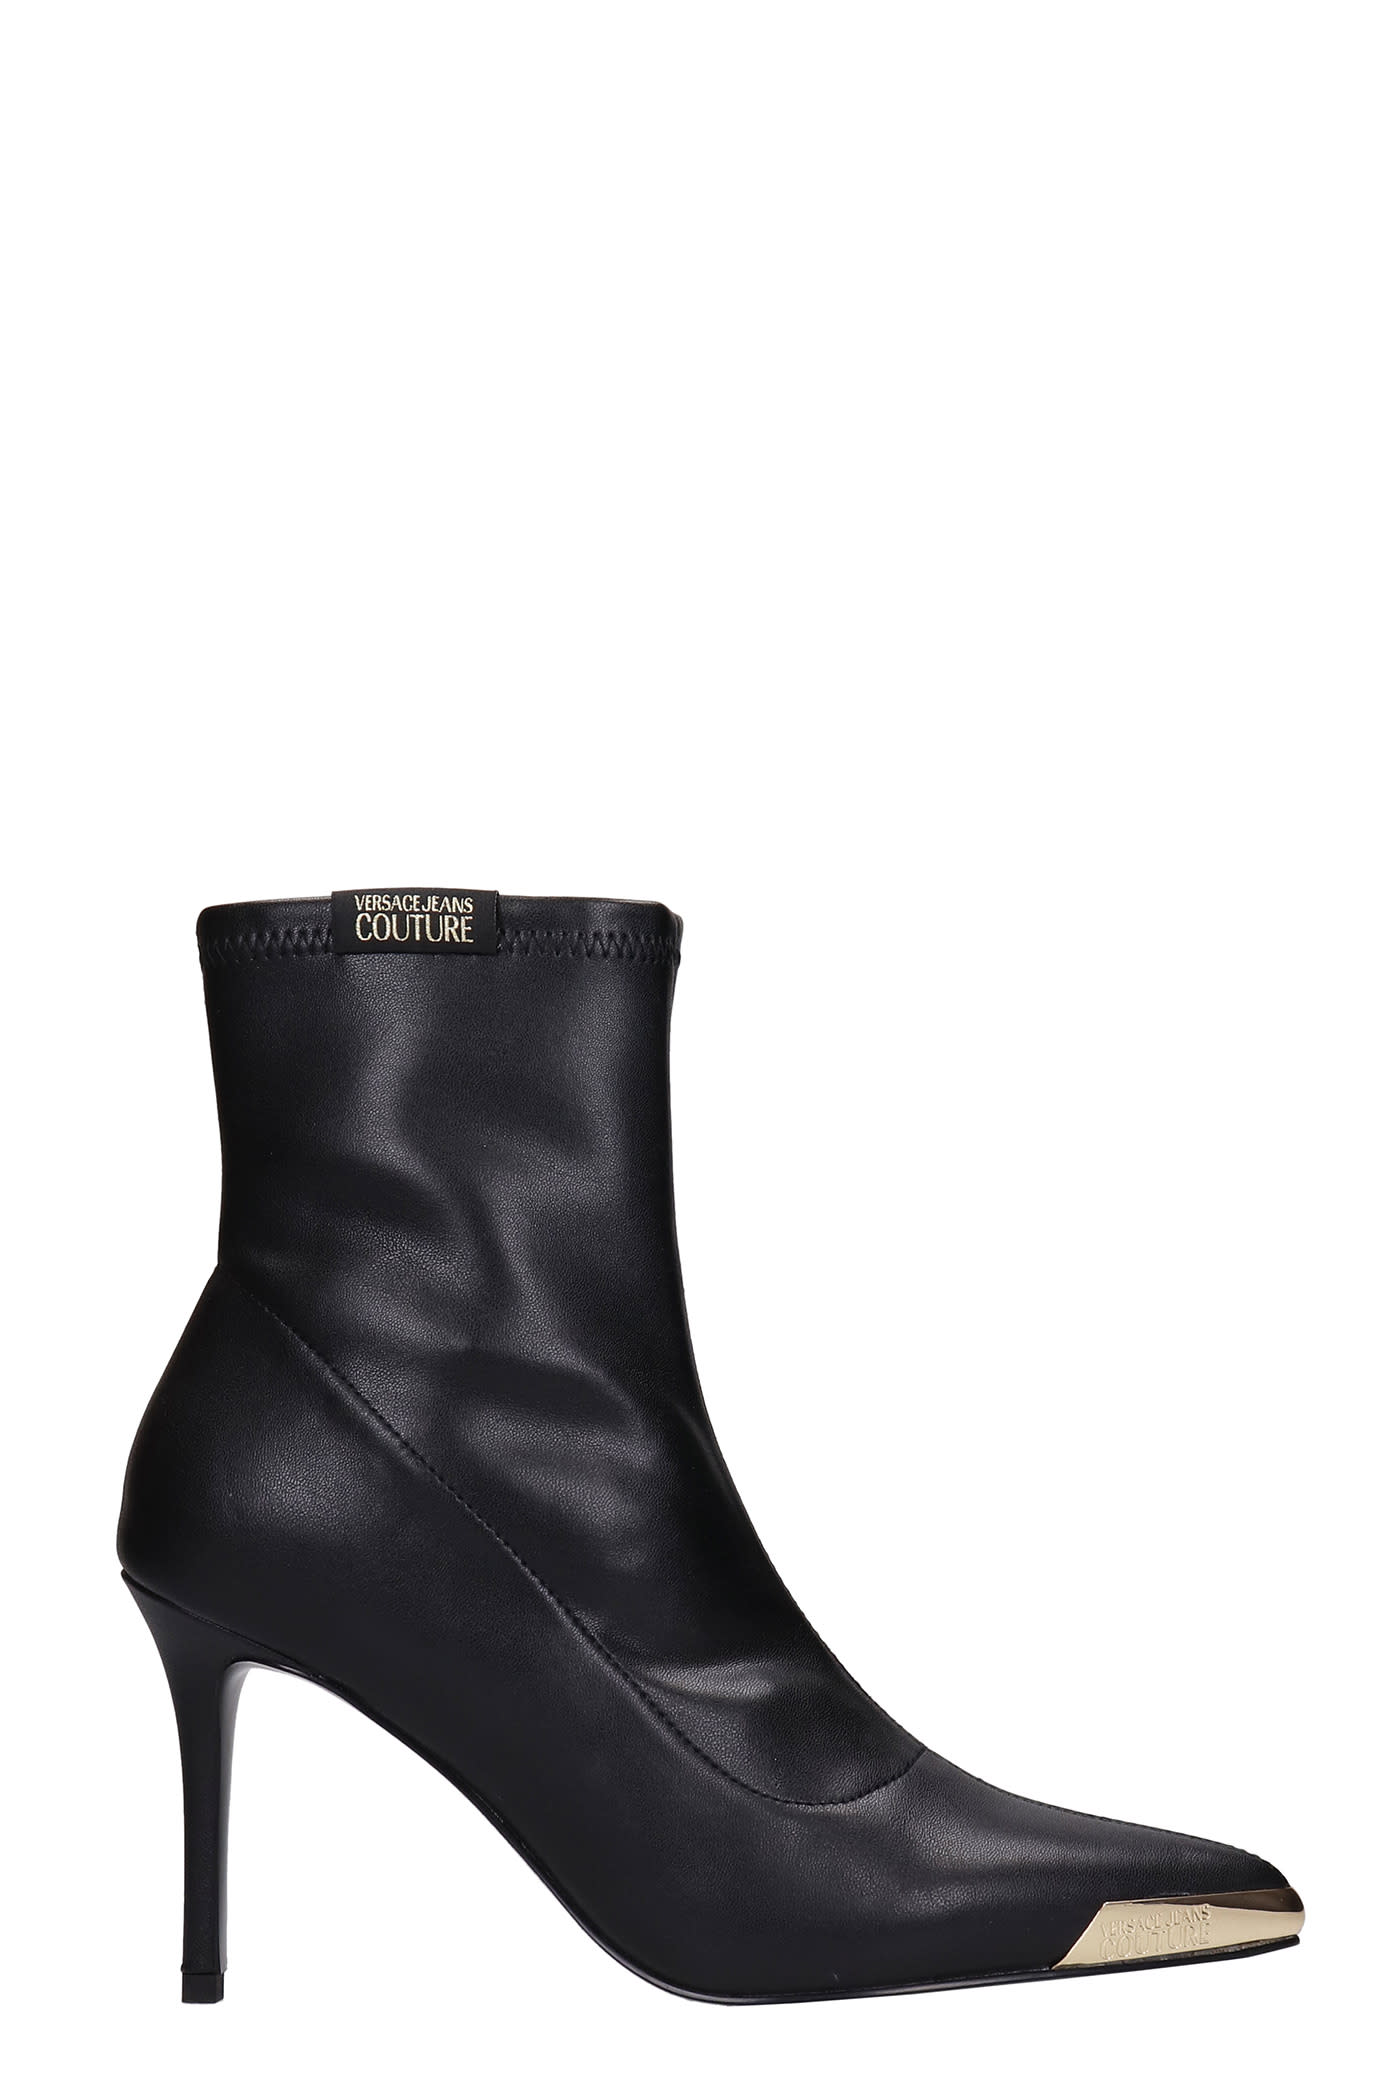 Versace Jeans Couture High Heels Ankle Boots In Black Faux Leather